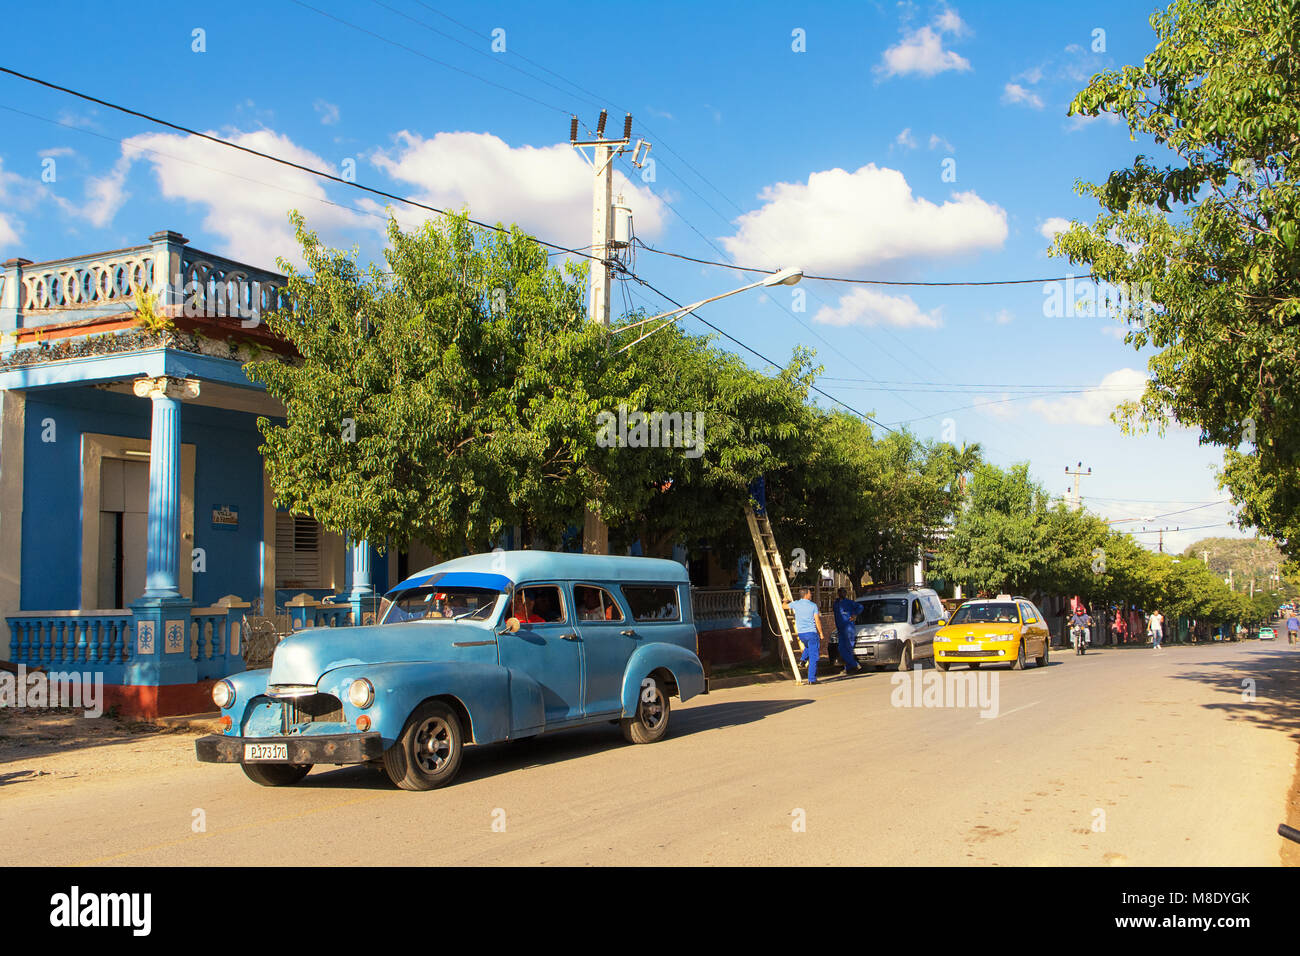 Vinales, Cuba - December 5, 2017: Old 1950s car in the central street of Vinales Stock Photo